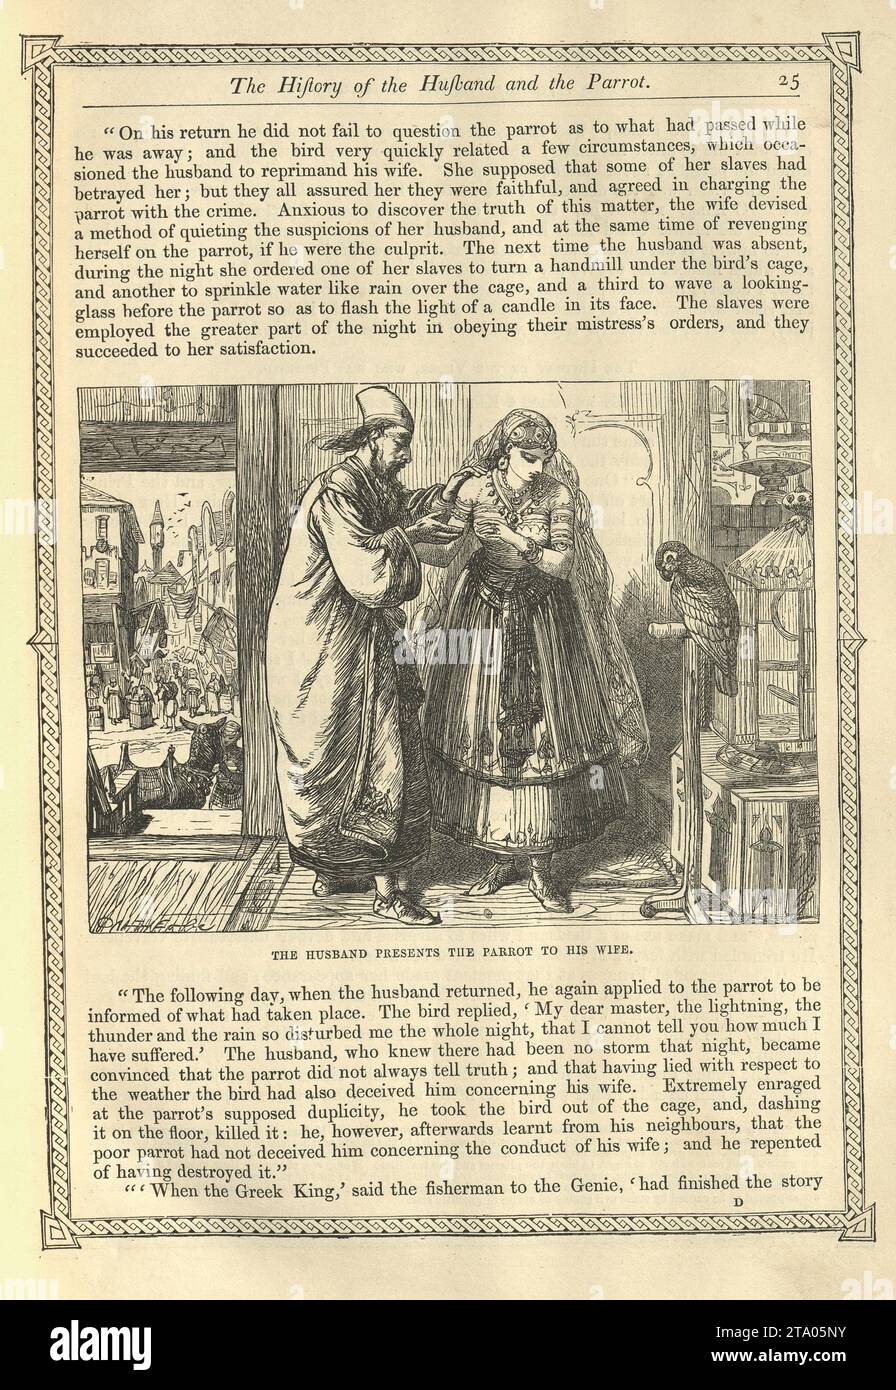 Vintage illustration One Thousand and One Nights, Husband presents the parrot to his wife, Arabian, Middle Eastern folktales, by The Brothers Dalziel Stock Photo